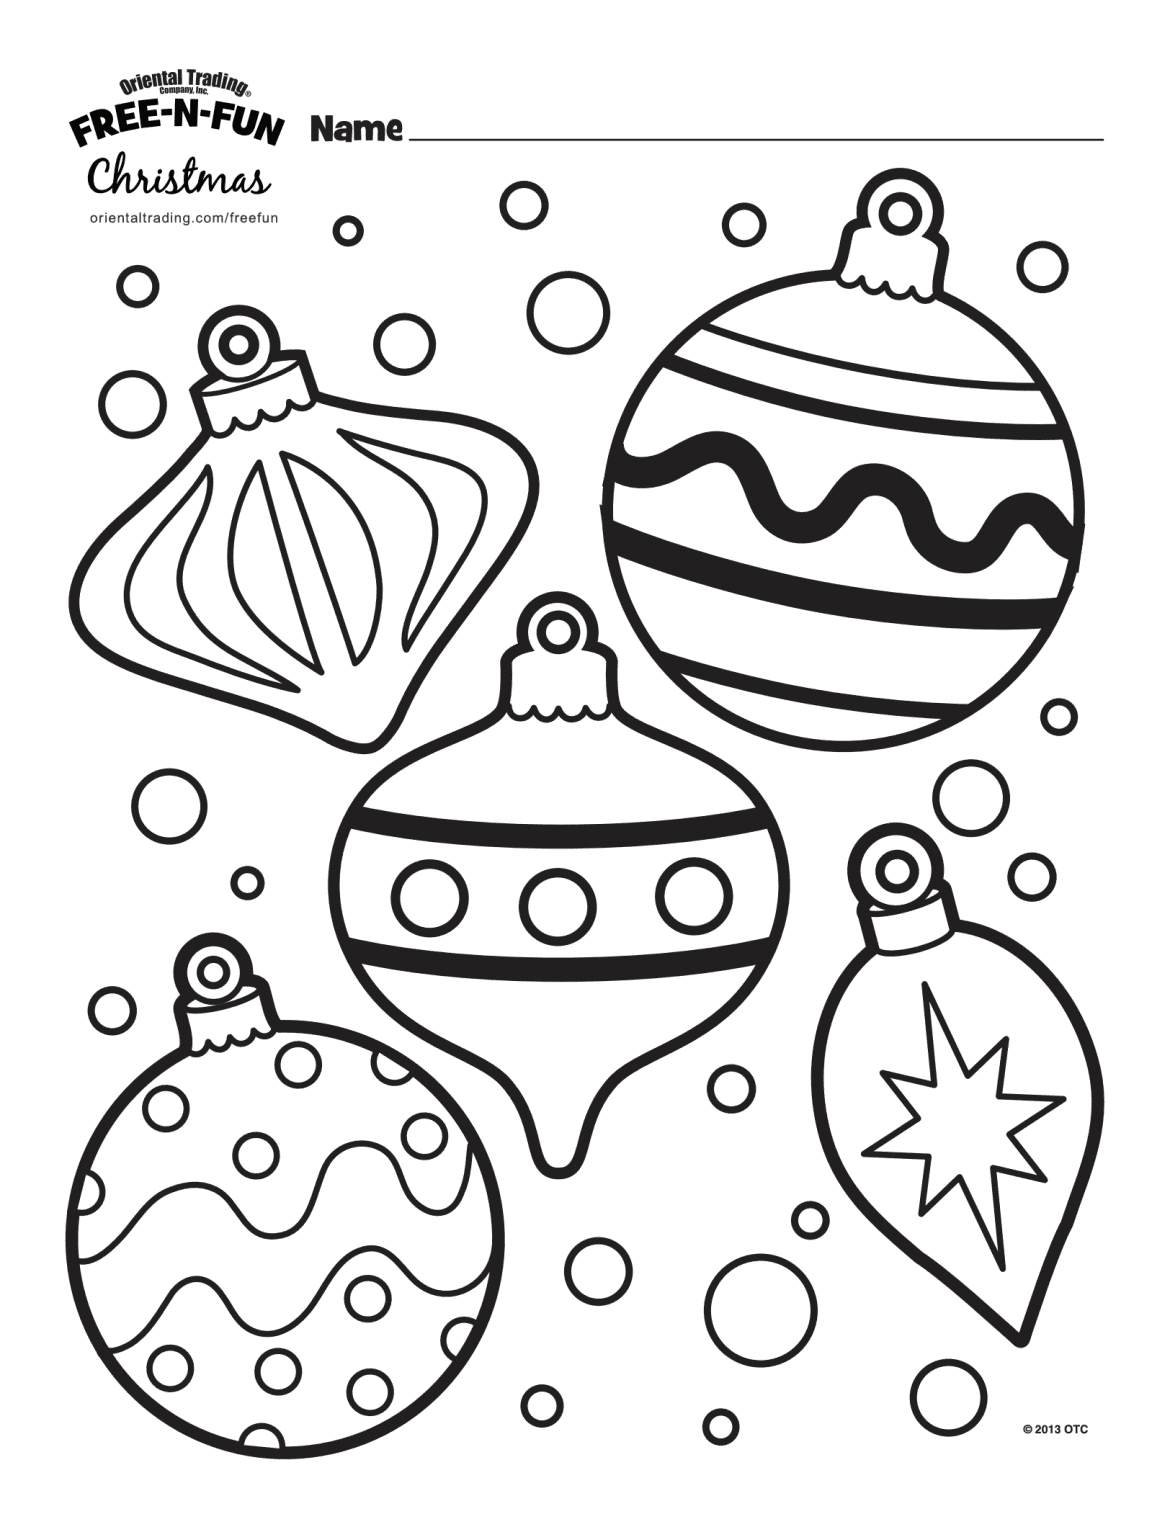 printable-christmas-colouring-pages-the-organised-housewife